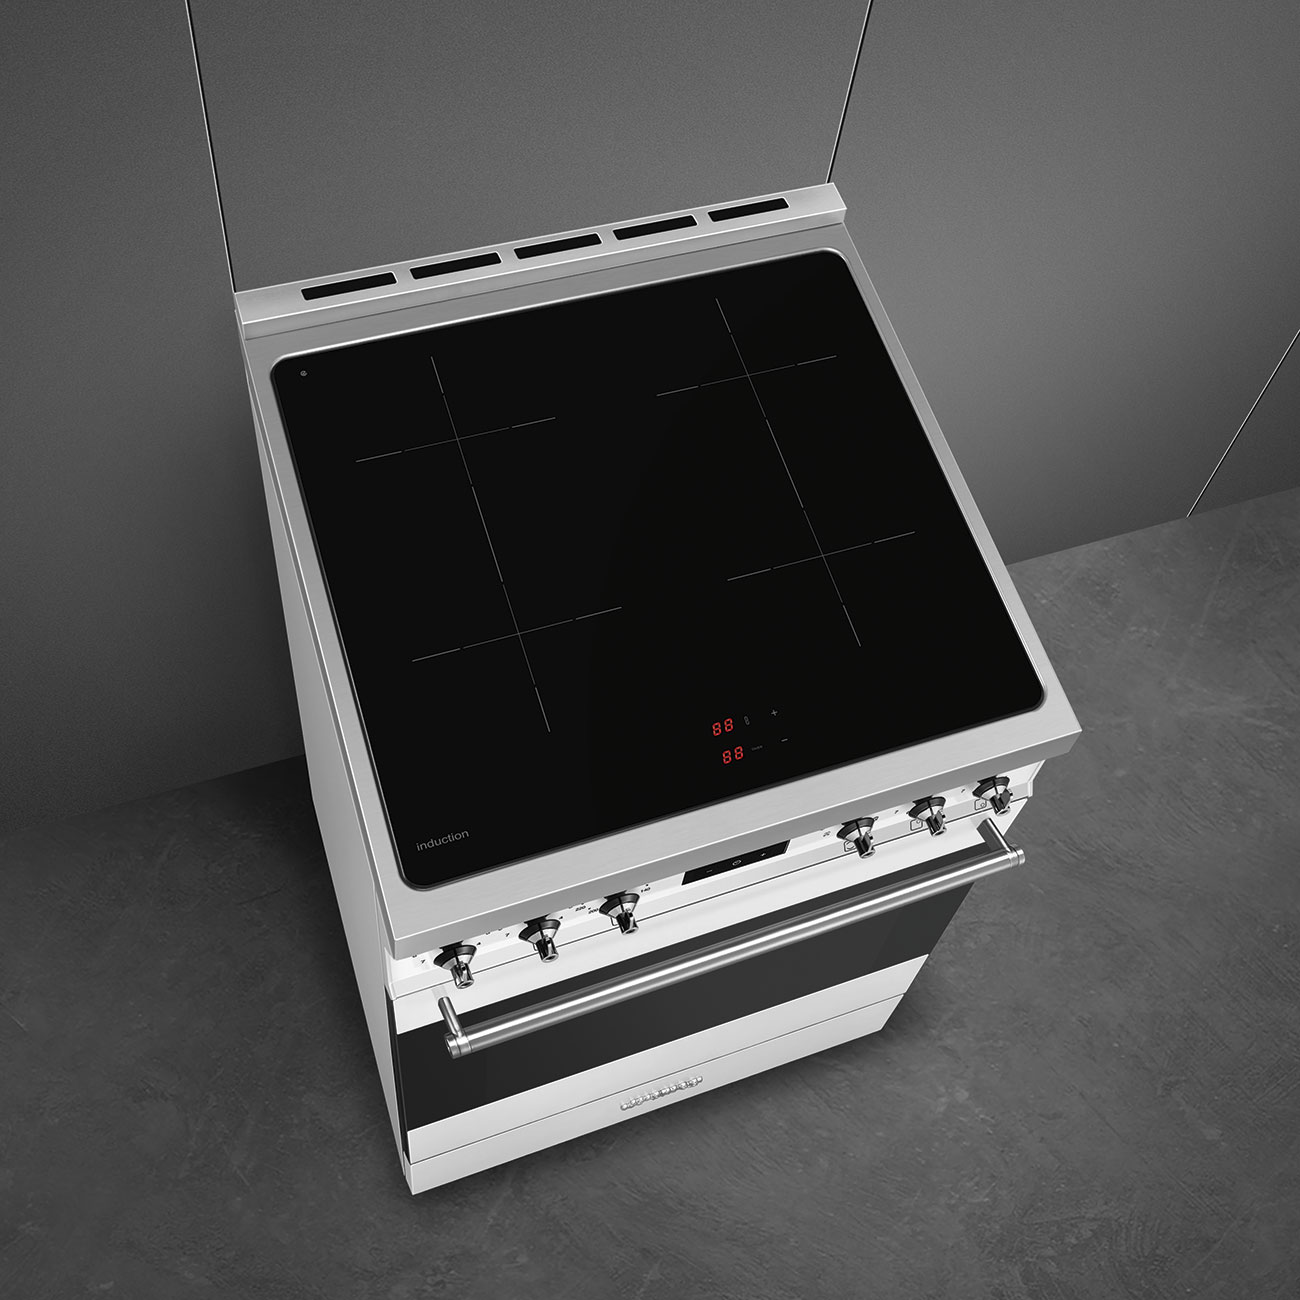 Smeg White Cooker with Induction Hob_6